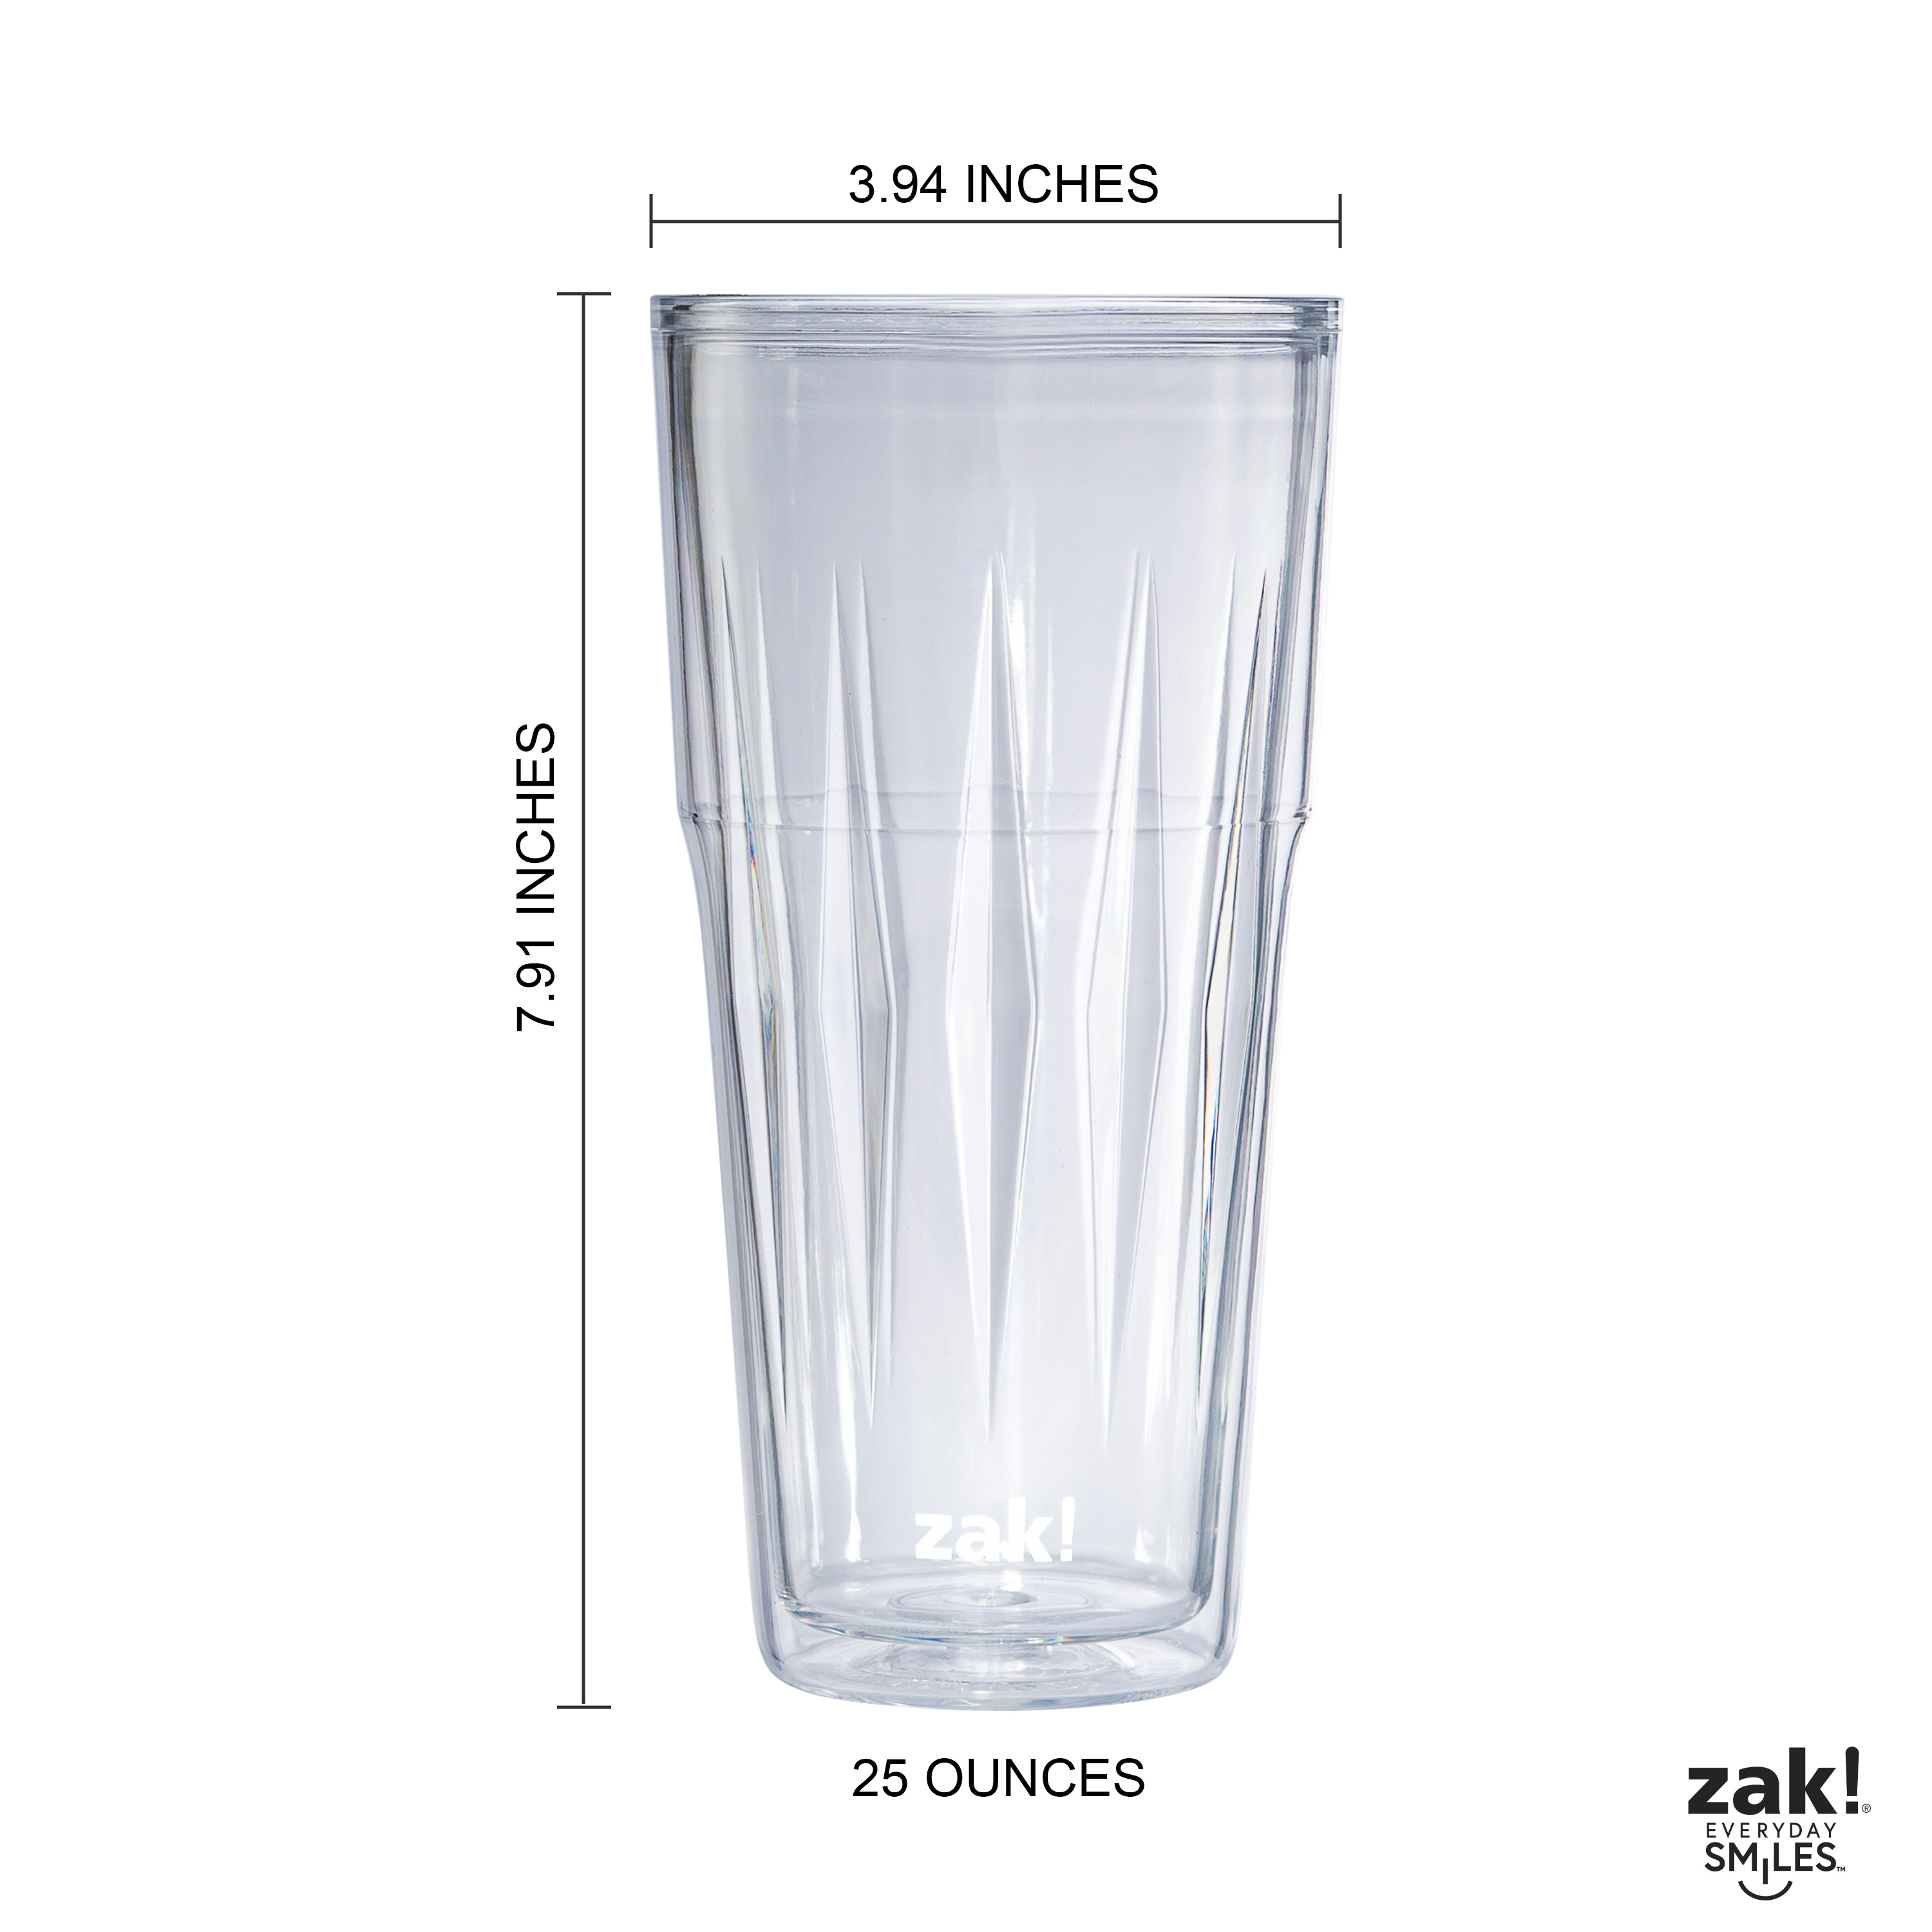 Zak Hydration 25 ounce Double-Wall Insulated Reusable Plastic Tumbler, Clear, 2-piece set slideshow image 16